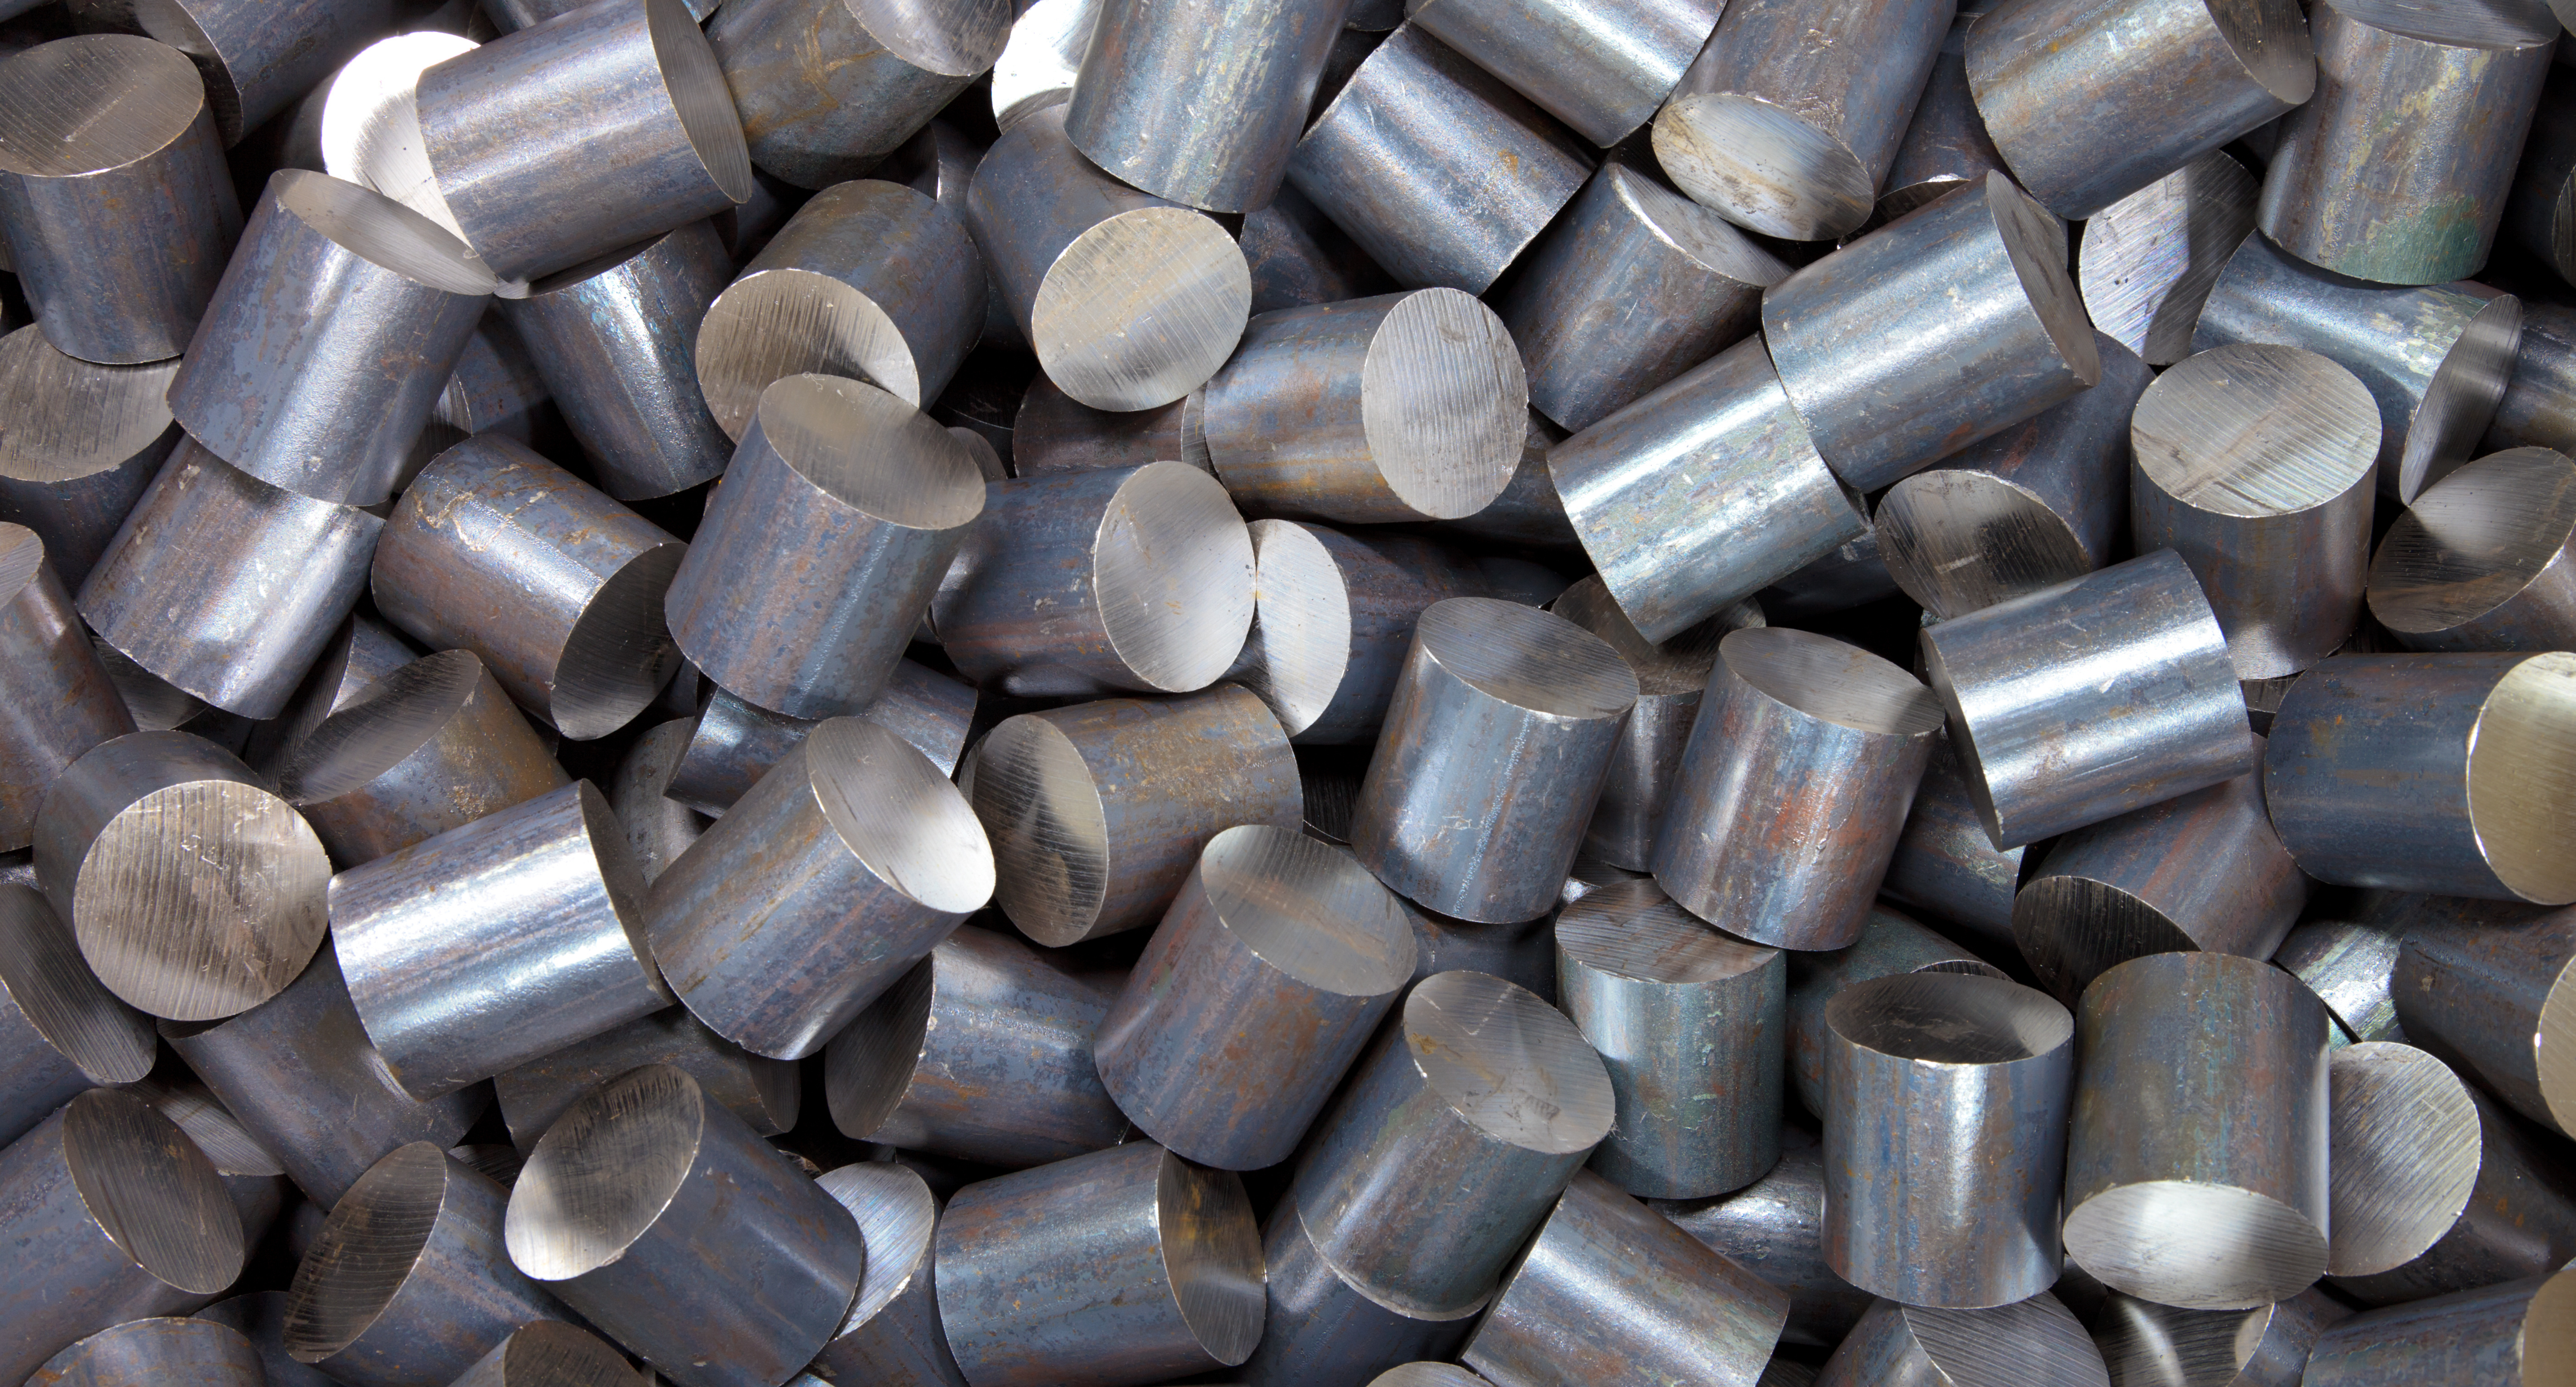 A pile of cylindrical stainles steel raw material, waiting to be processed